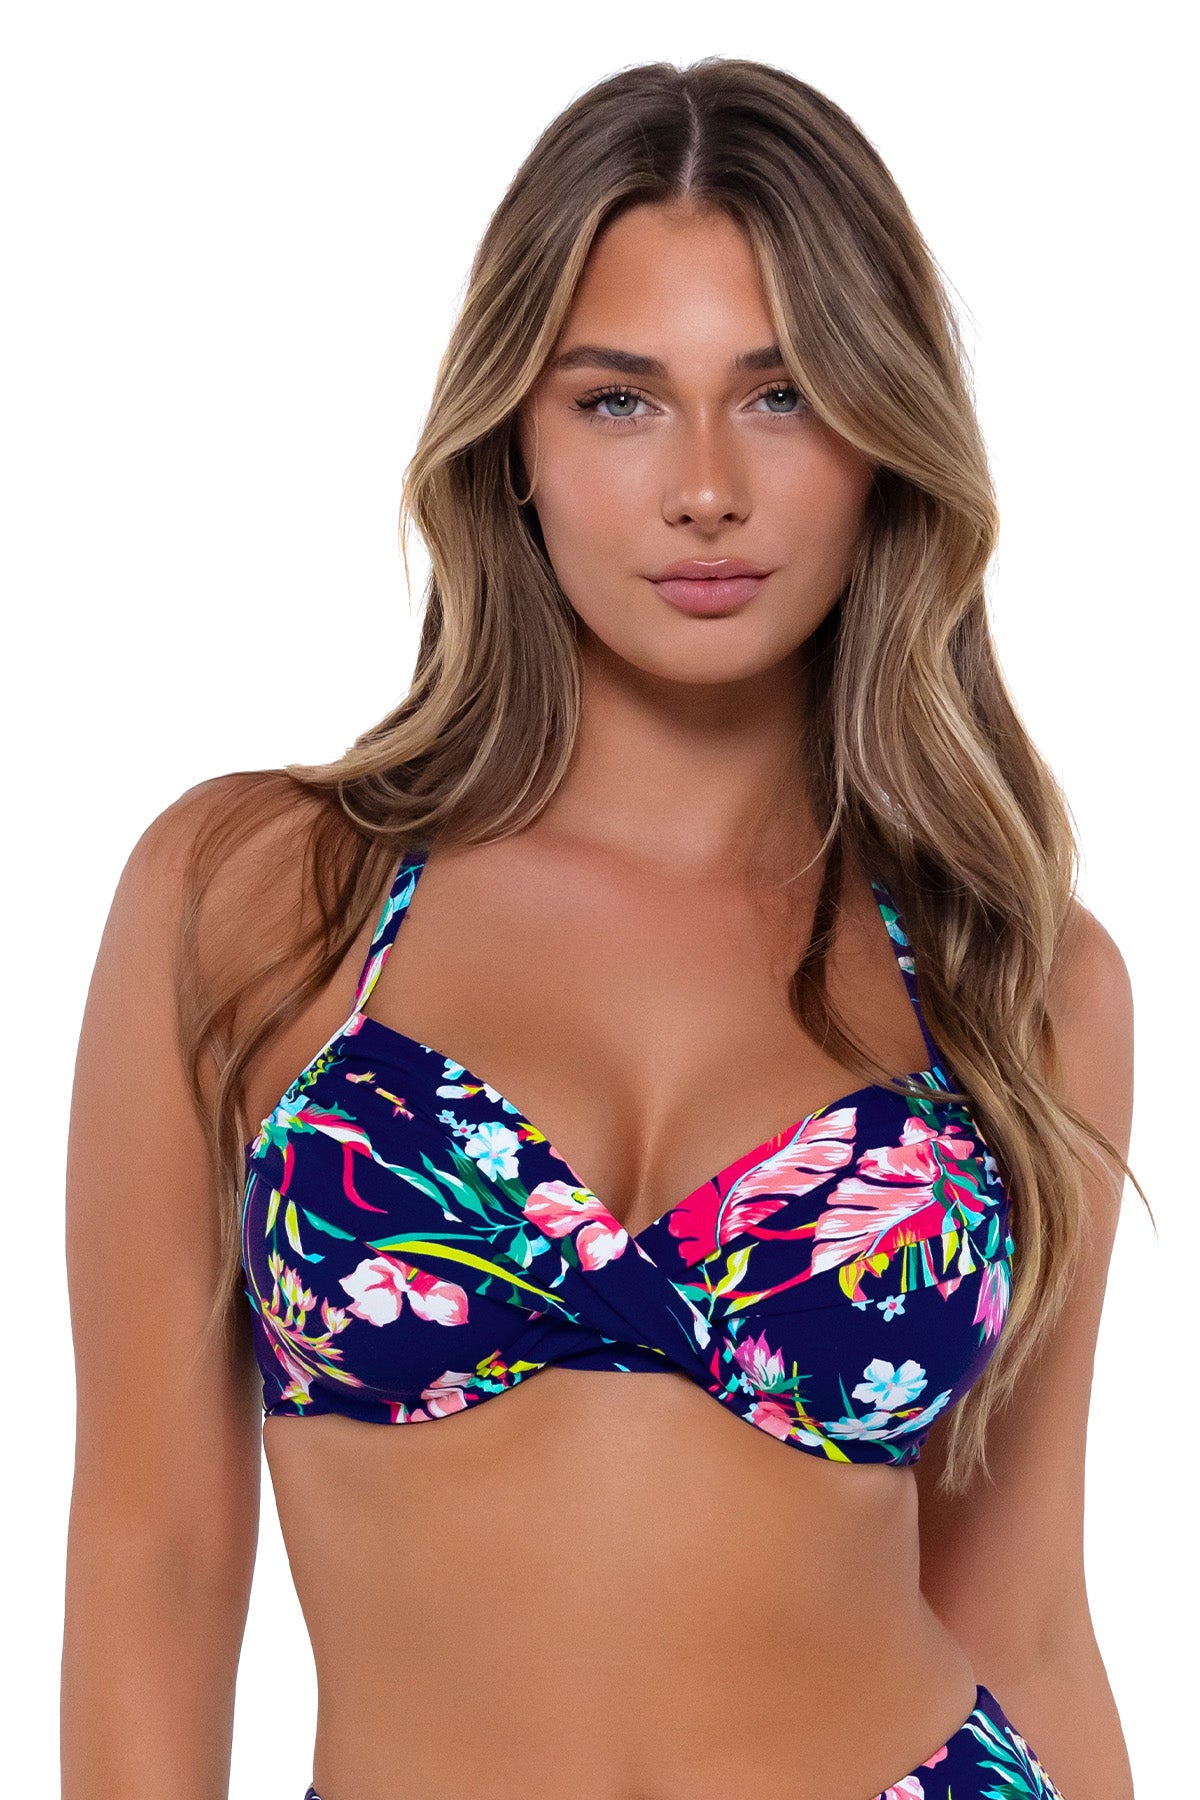 Front pose #2 of Taylor wearing Sunsets Island Getaway Crossroads Underwire Top